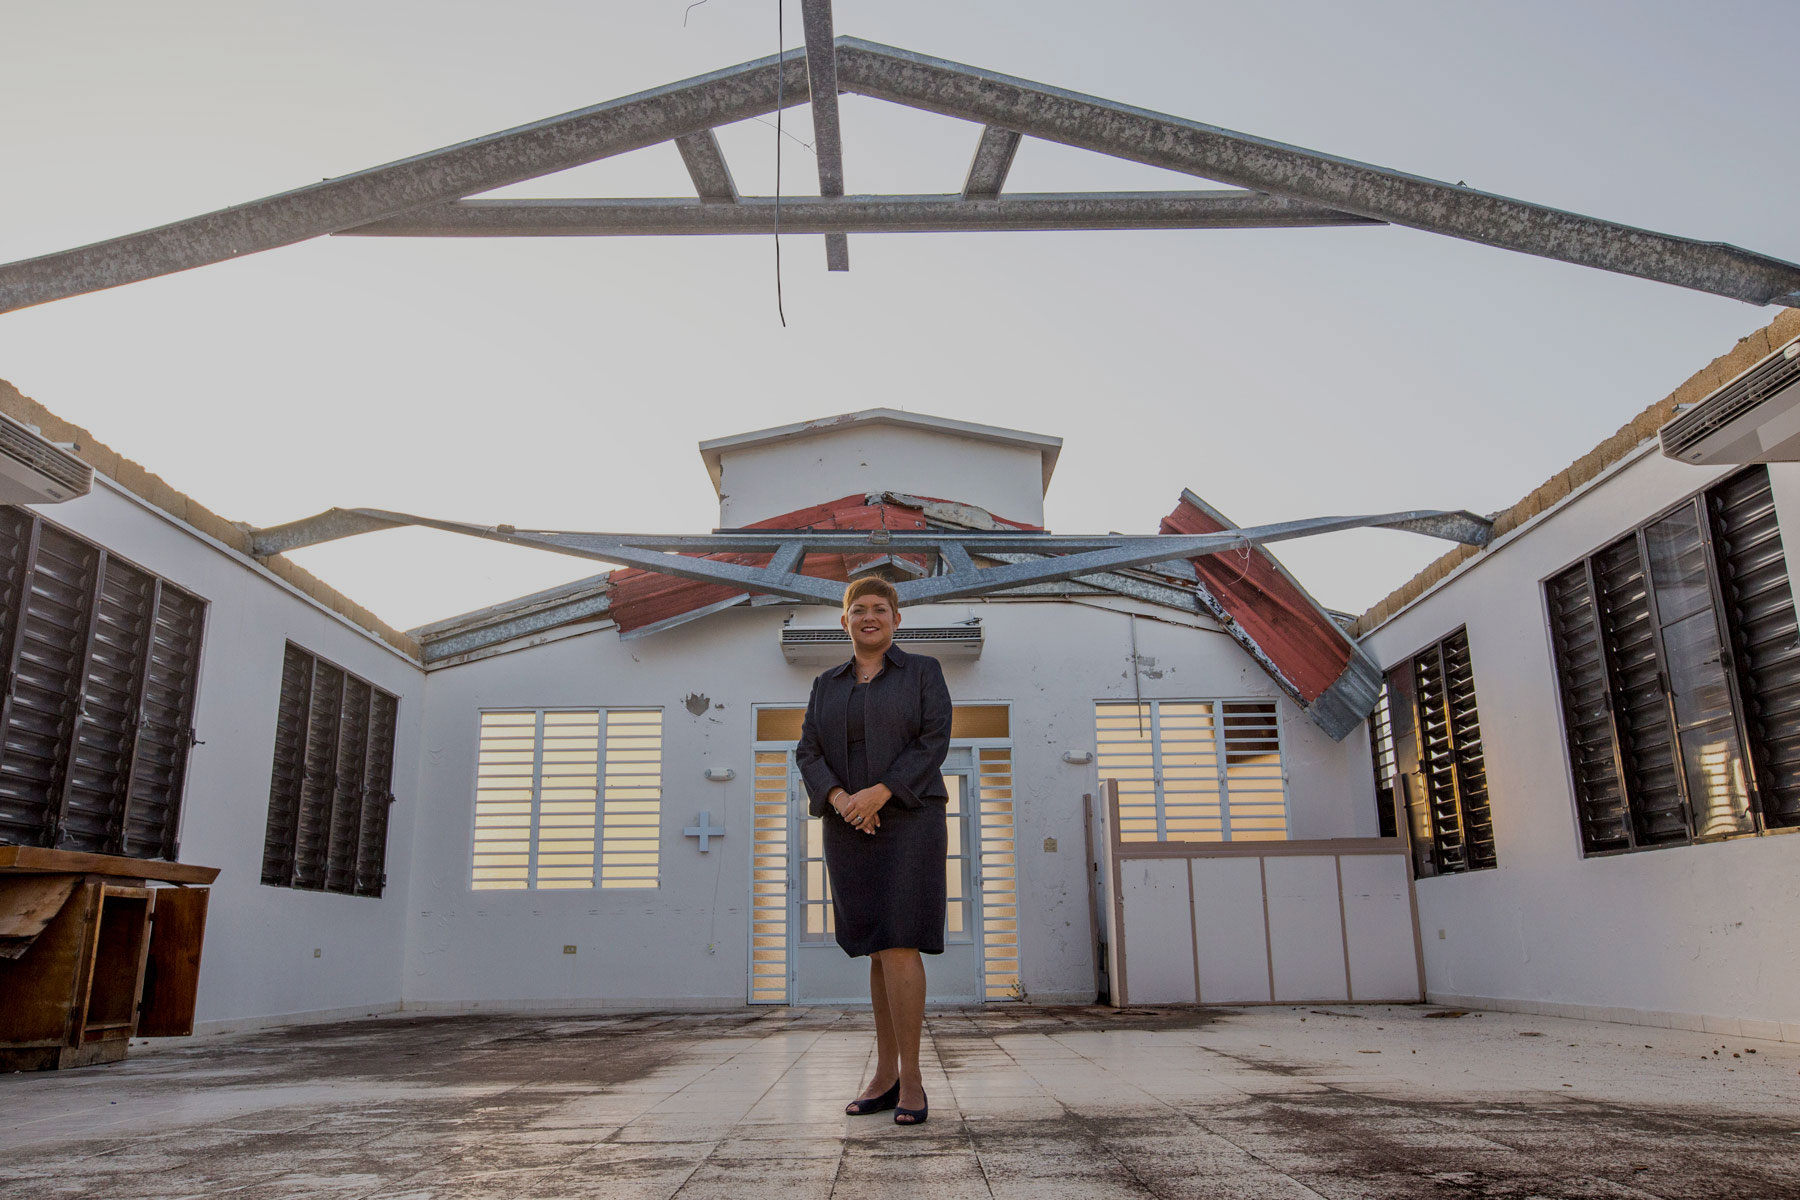 Pastora Milly Cortes stands in Iglesia Cristian (Discipulos de Cristo) La Grama, which has no roof and sustained other damage during Hurricane Maria.